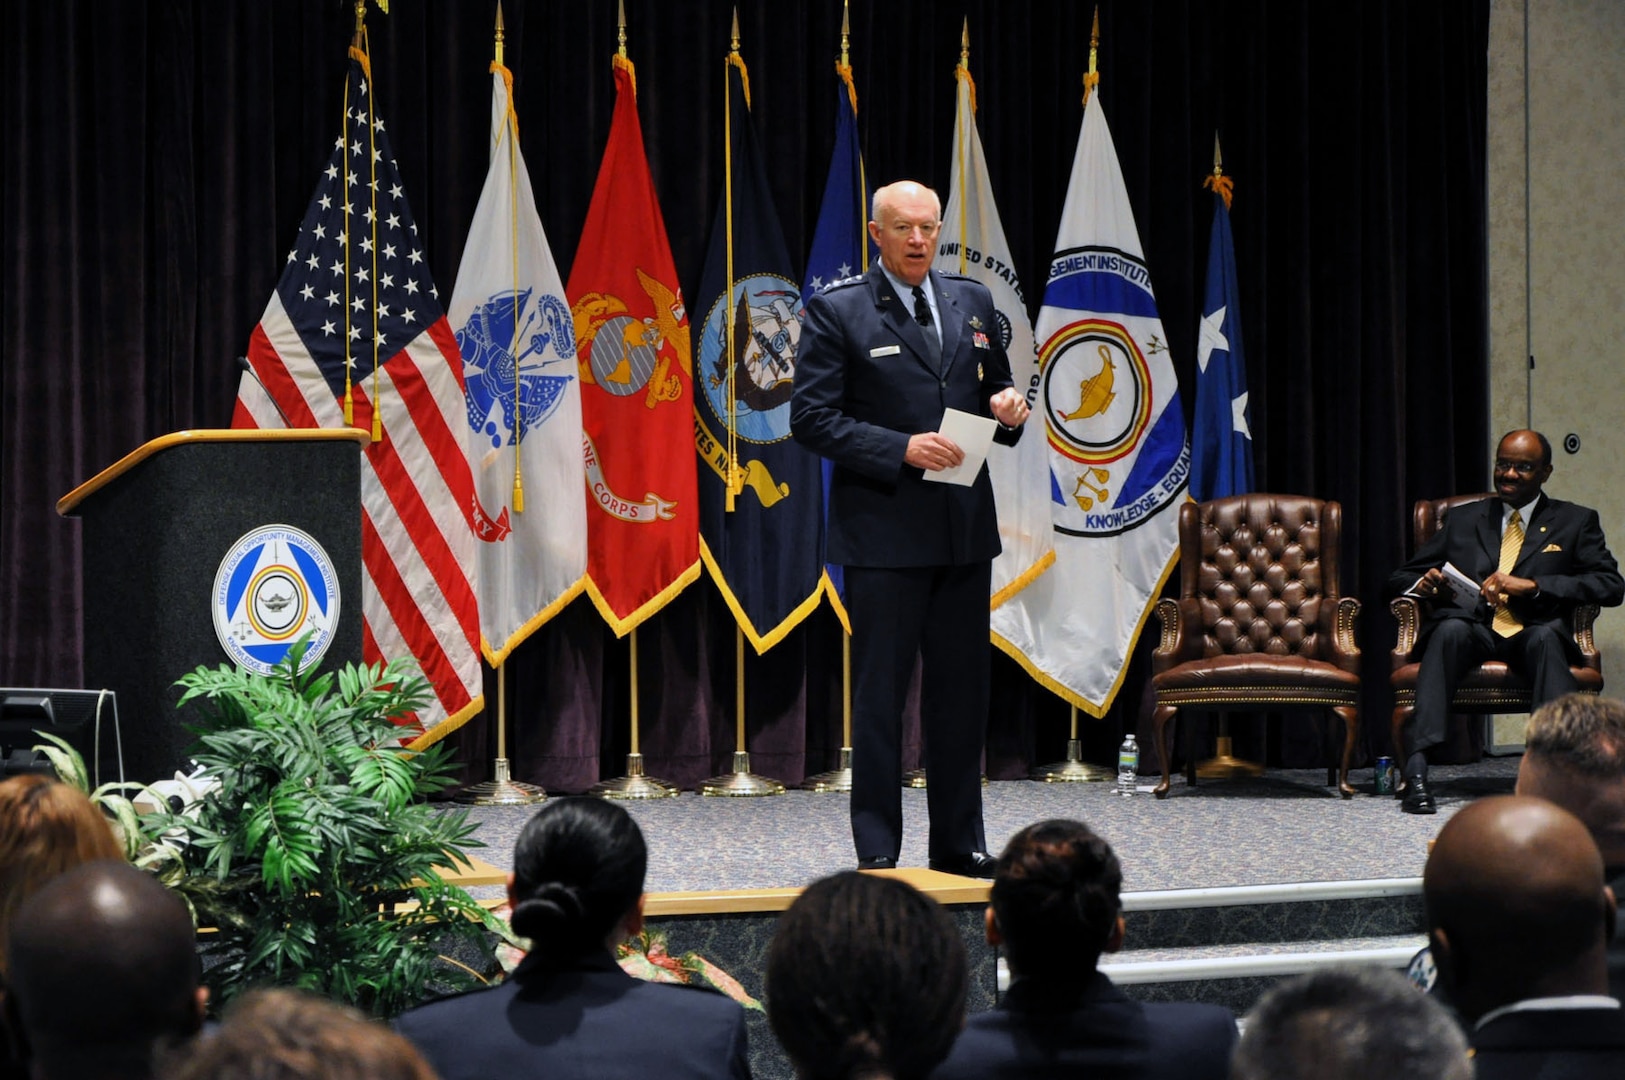 Air Force Lt. Gen. Harry M. Wyatt III, director of the Air National Guard, addresses Guard and Reserve graduates of the Defense
Equal Opportunity Management Institute's Equal Opportunity Advisor Reserve
Component Program on Feb. 4, 2011, at the Institute. The EOARCP curriculum
develops a base of knowledge and skills that allow graduates to assess human
relations climates in the organizations they serve, and to provide advice
and assistance to commanders to prevent, reduce or eliminate discriminatory
practices.